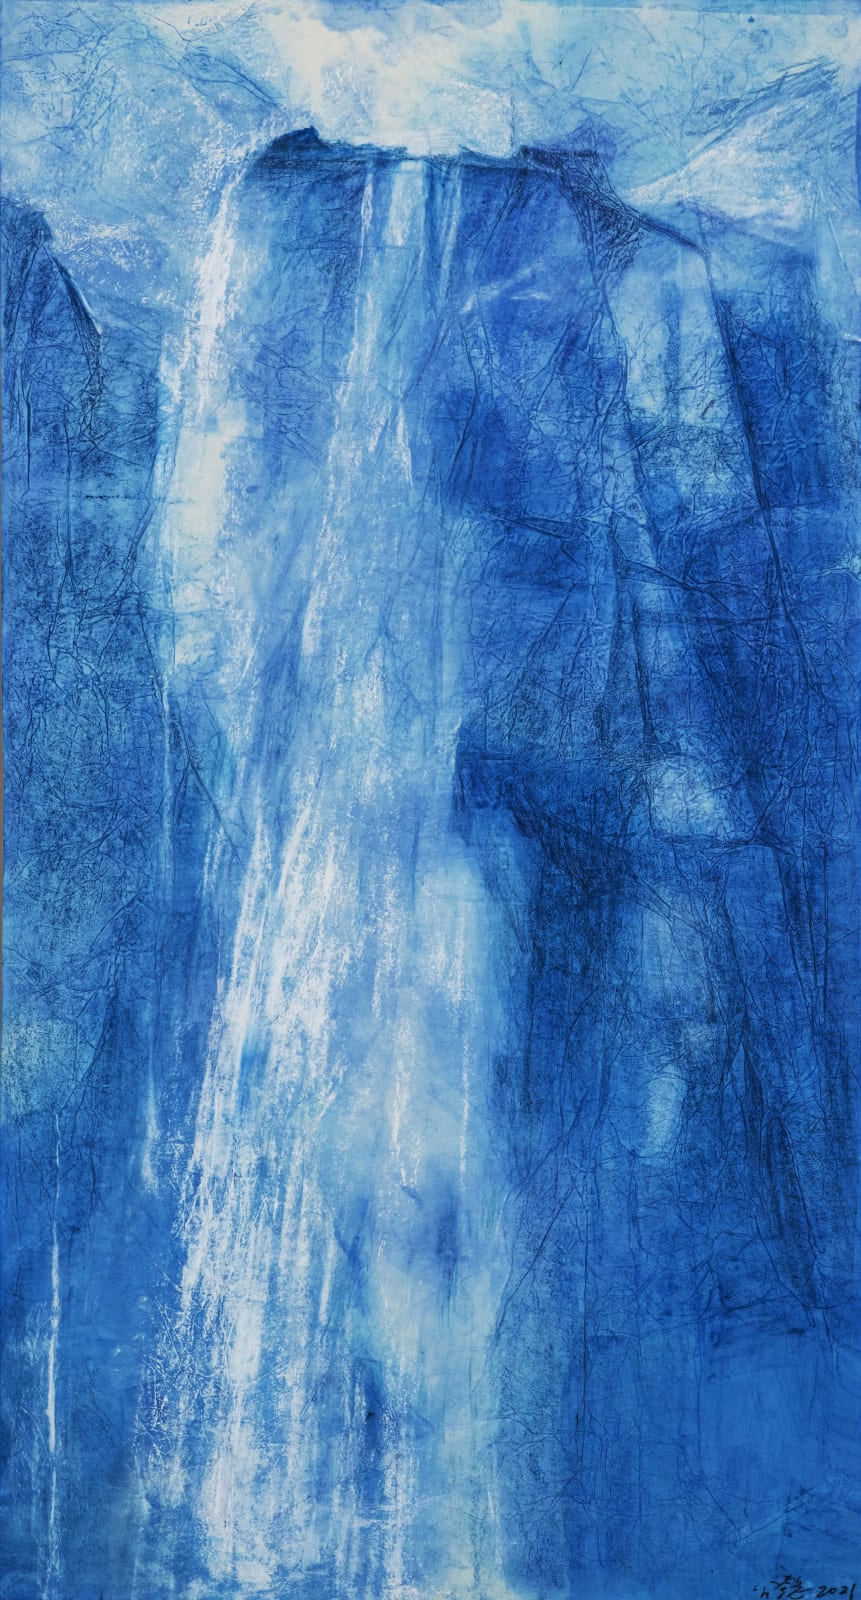 Waterfall Watercolor and Pastel on Raw Xuan Paper 180 x 97 cm, 2021